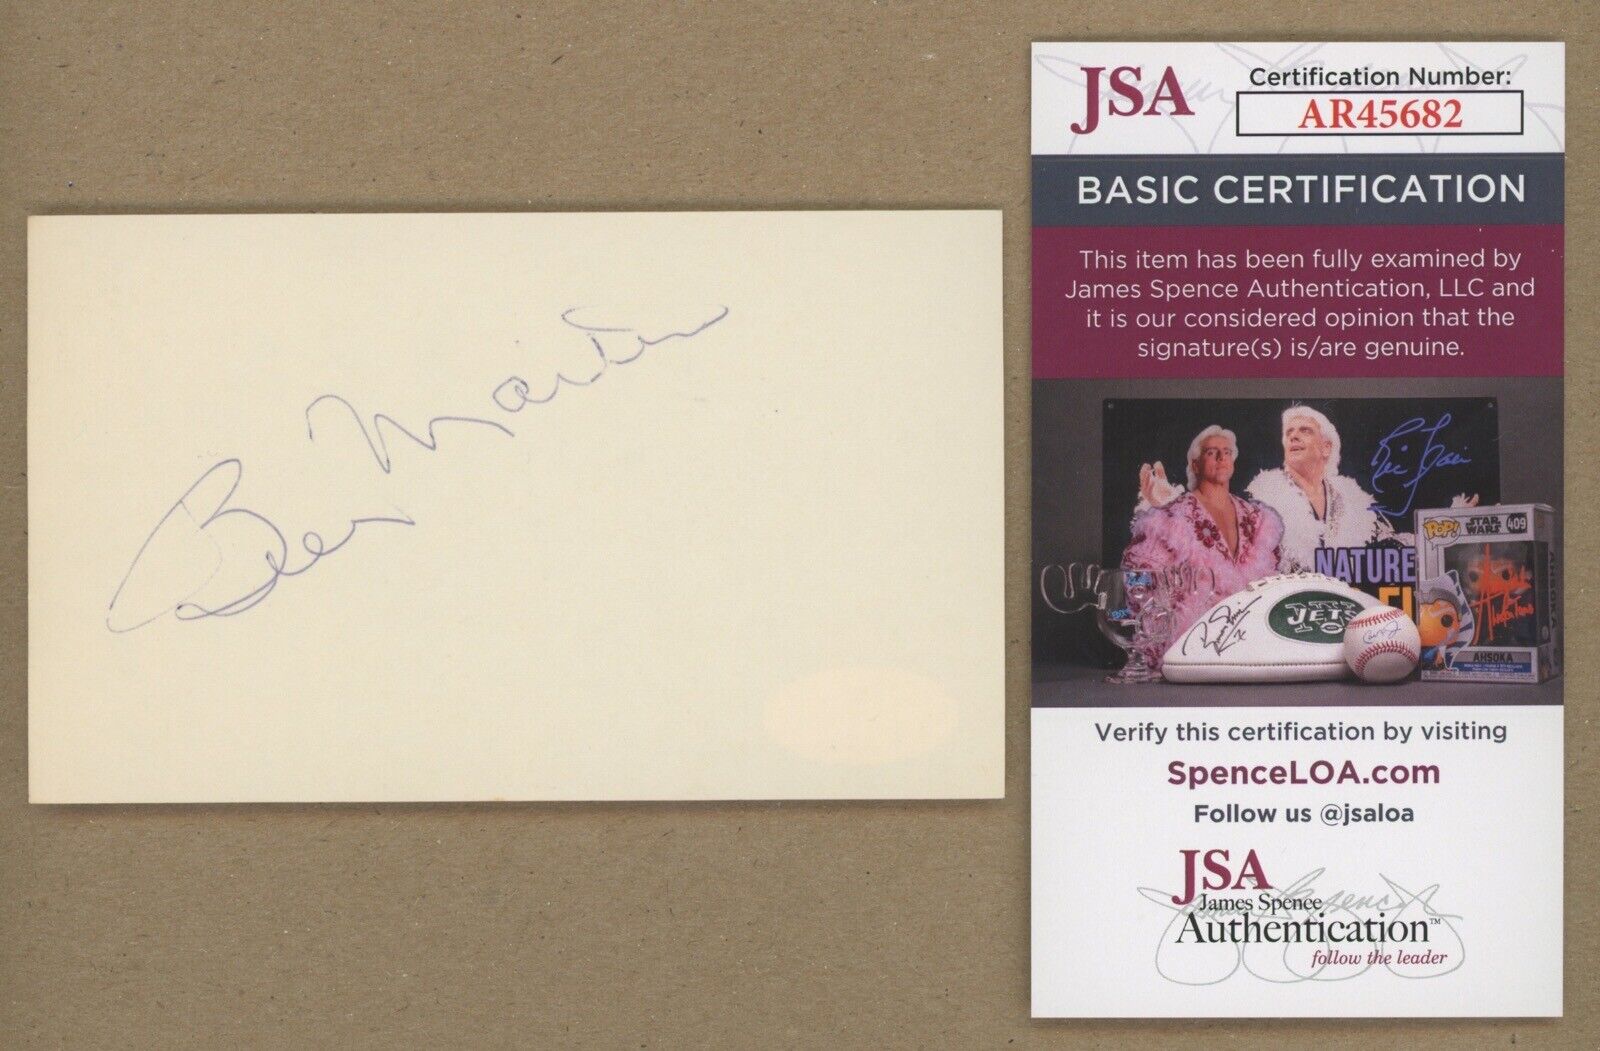 Billy Martin Signed Index Card Auto with JSA Certification